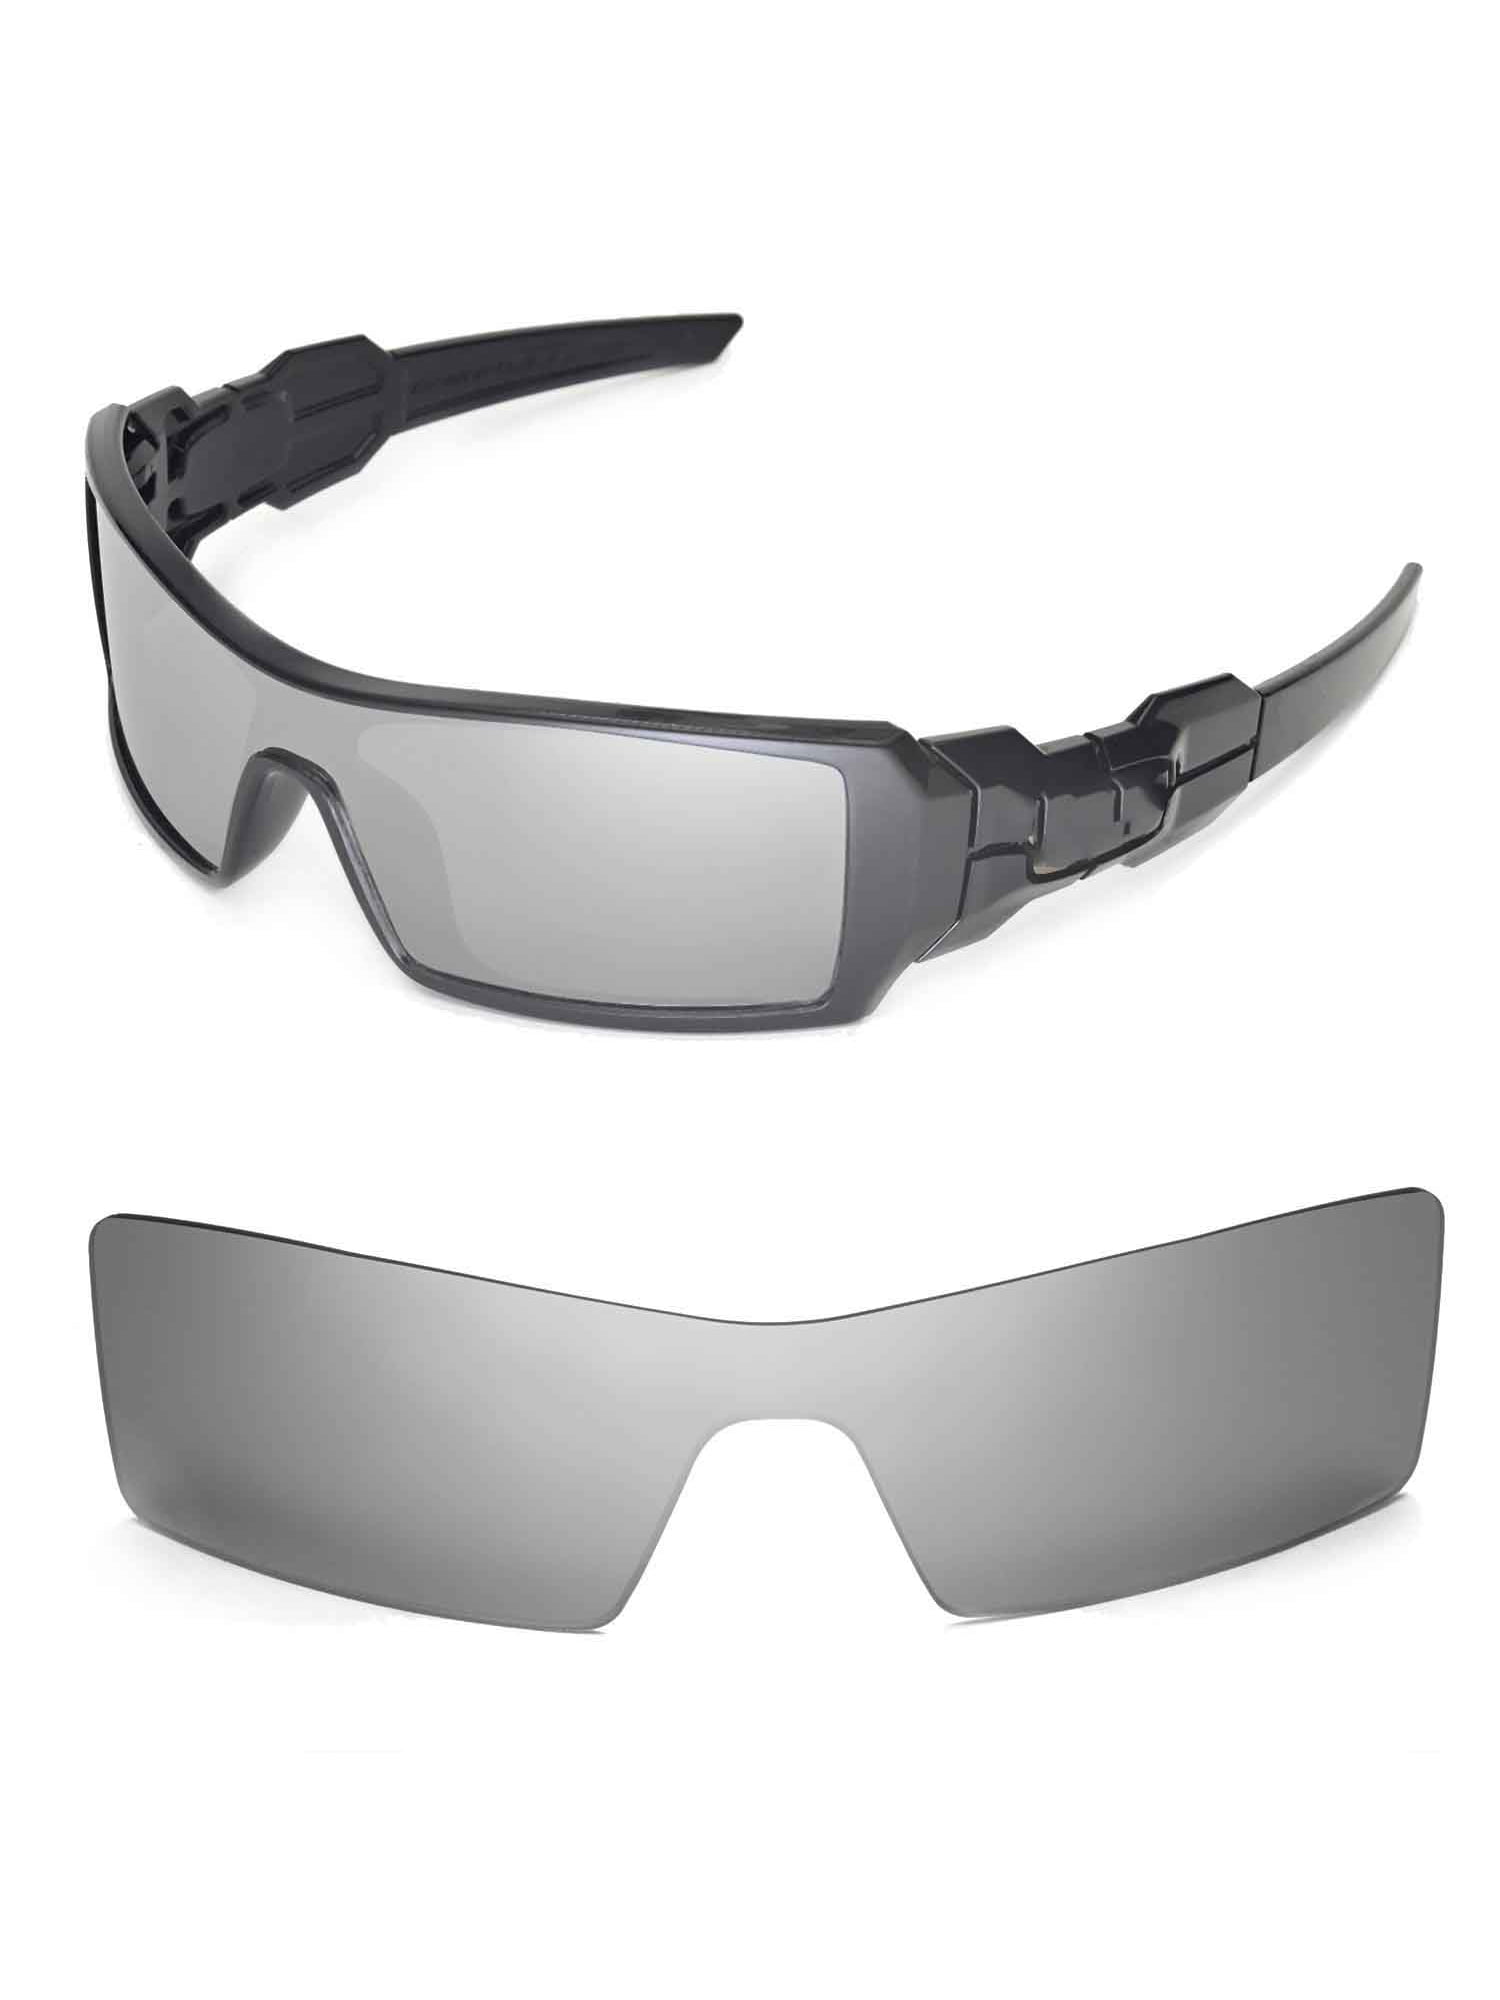 replacement lenses for oakley oil rigs